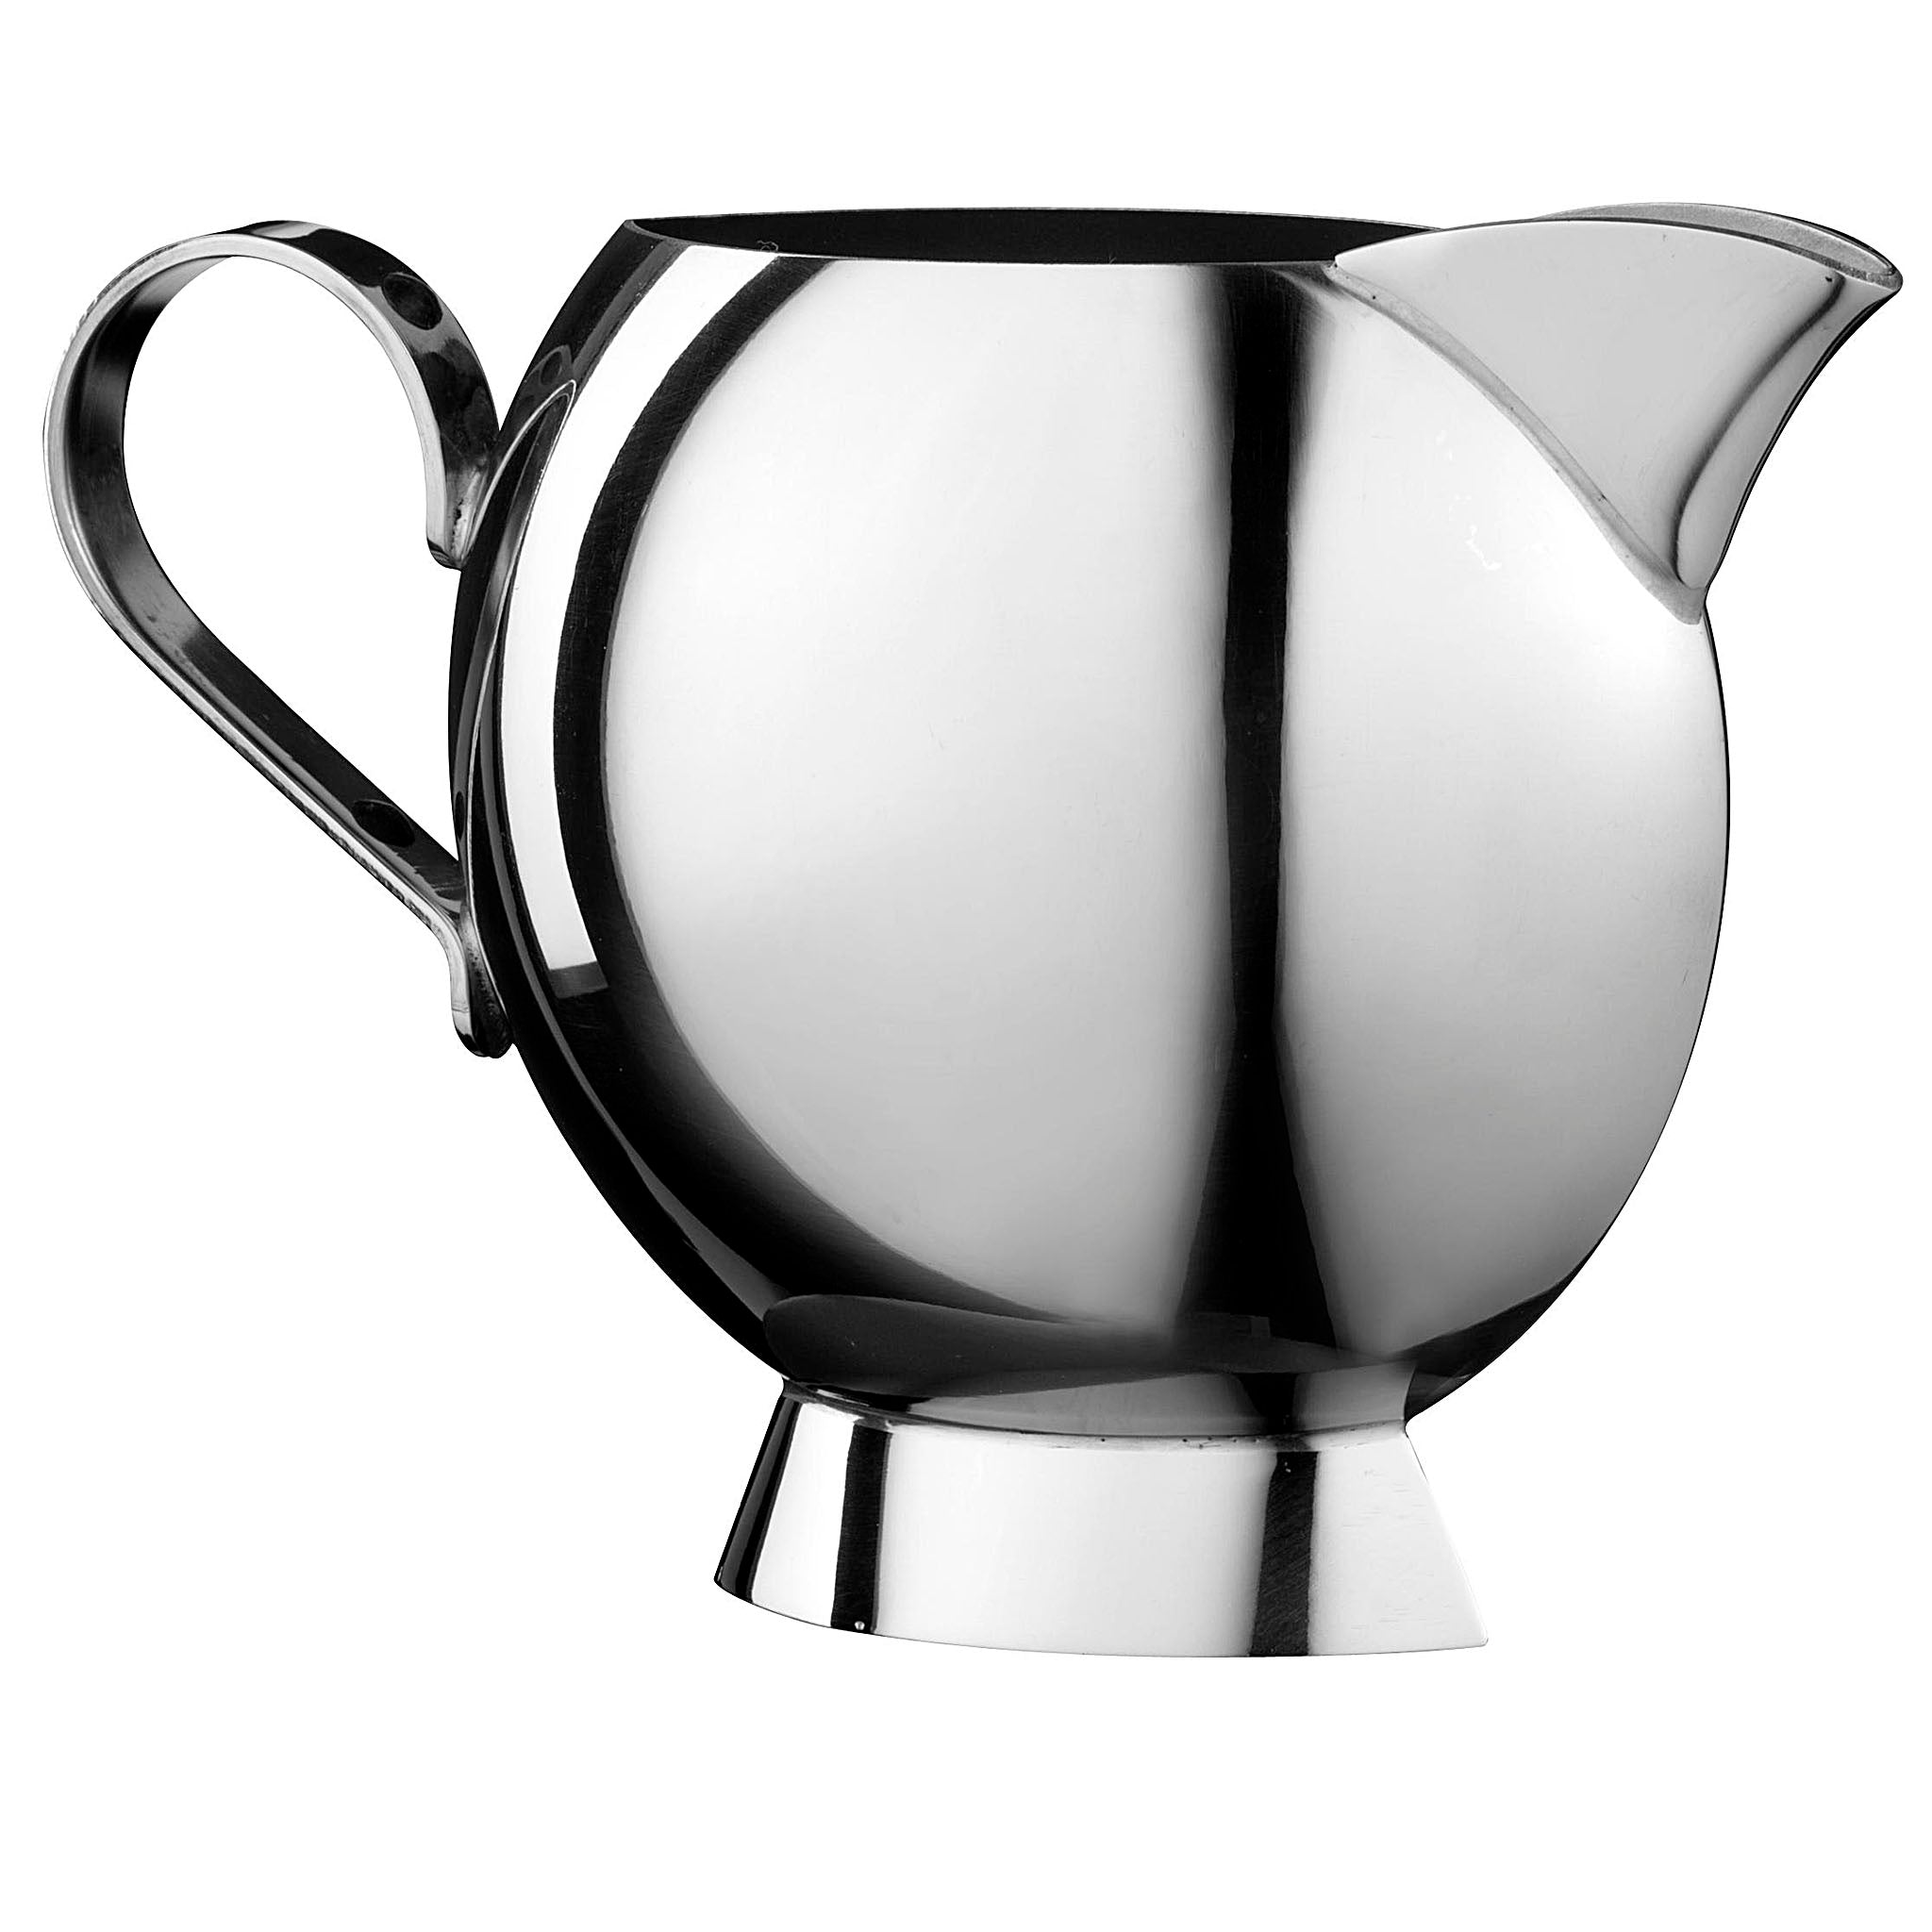 New York Weddings, "The Checklist: Gifts You'll Love - Nick Munro's Sunfish tea serving set," Summer 2011, page 44.  